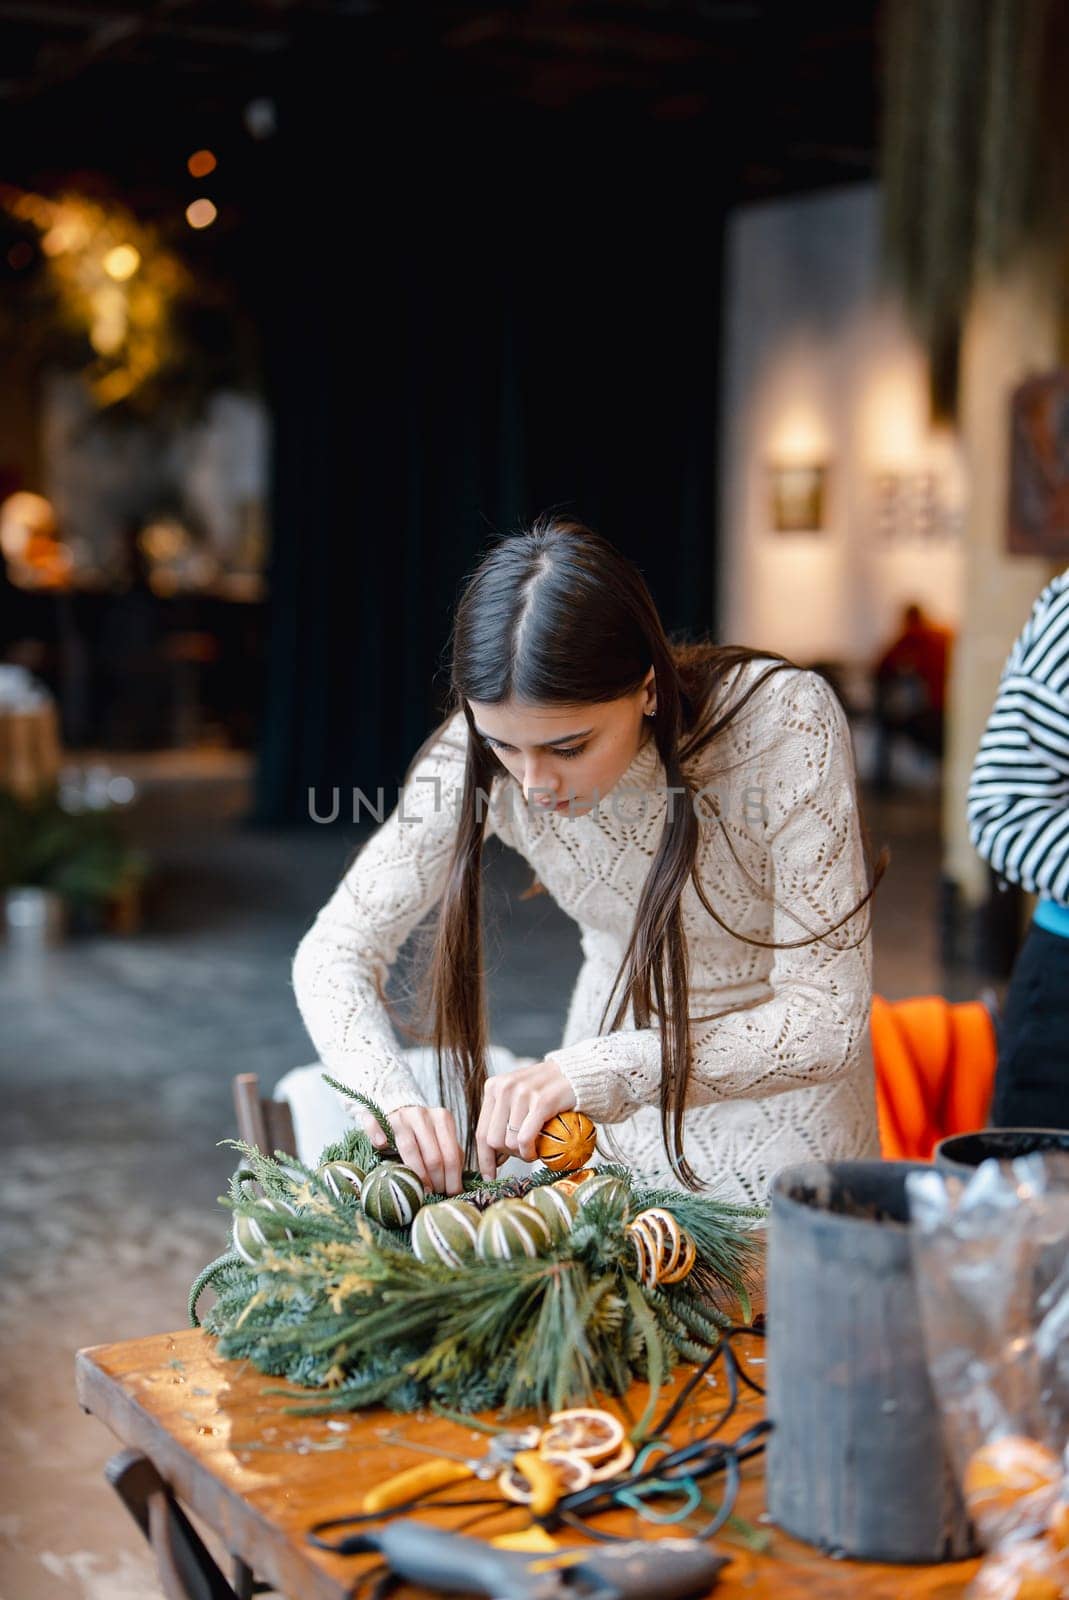 An elegant young woman passionately learning at a Christmas decor workshop. by teksomolika